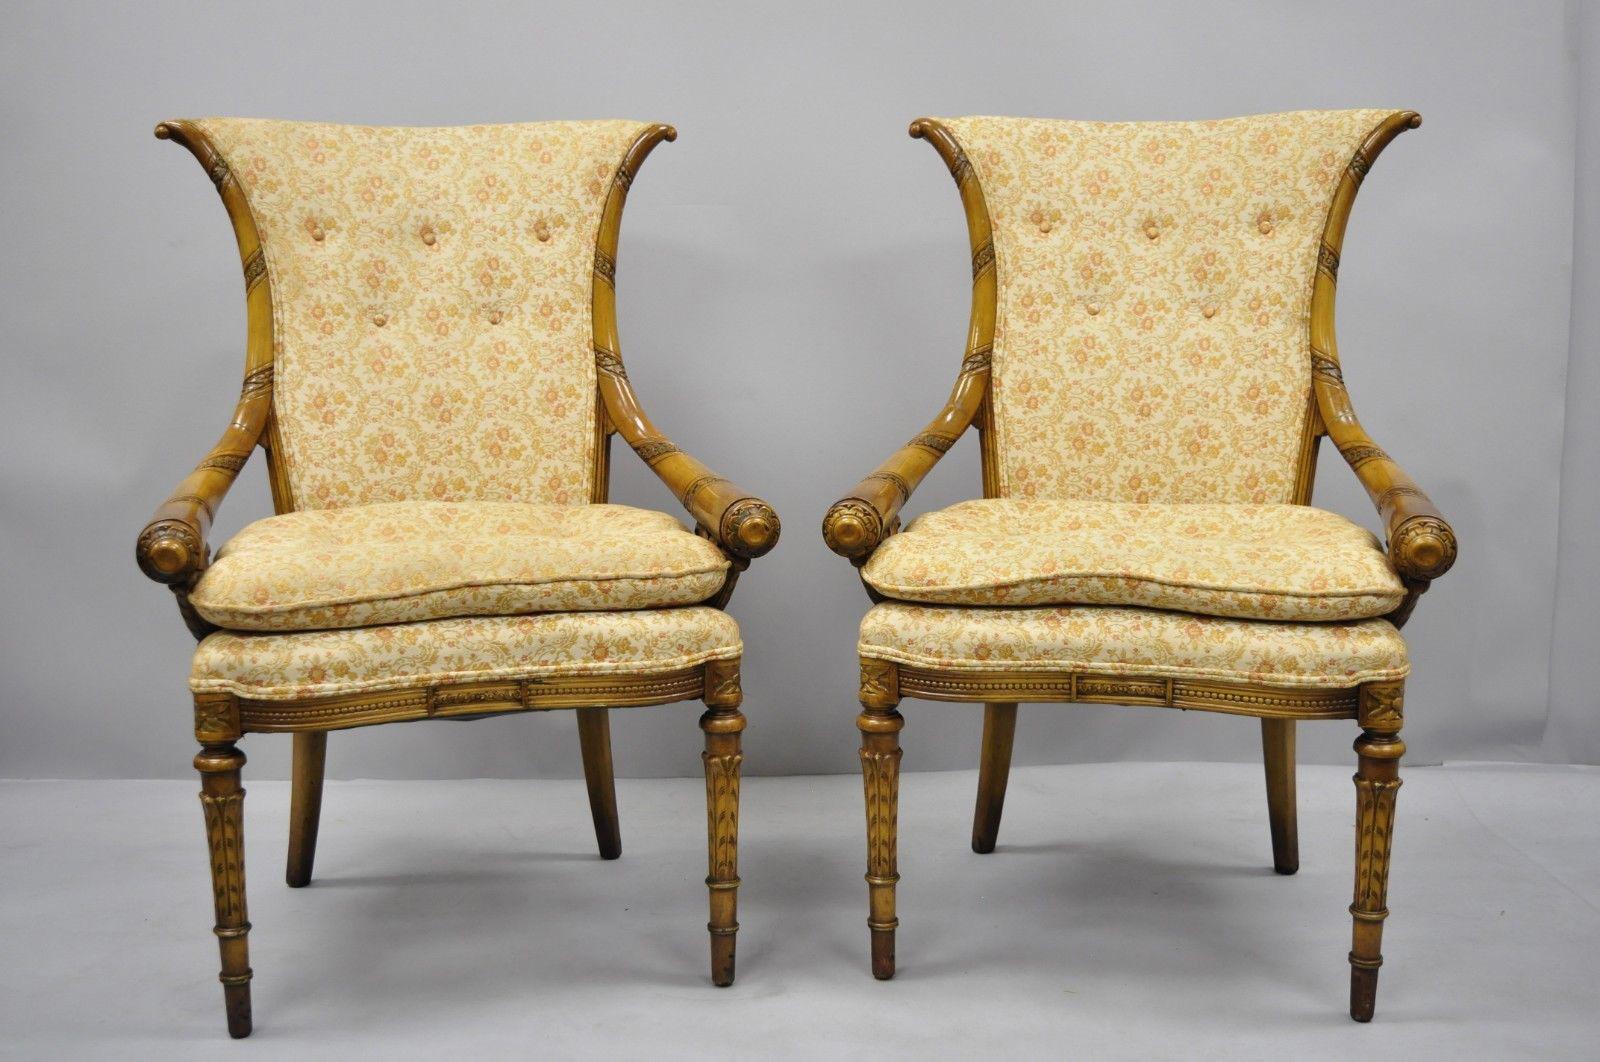 Pair of Hollywood Regency French style Cornucopia carved chairs after Grosfeld House. Item features solid wood construction, distressed finish, nicely carved details, tapered legs, and sleek sculptural form, circa early to mid-20th century.